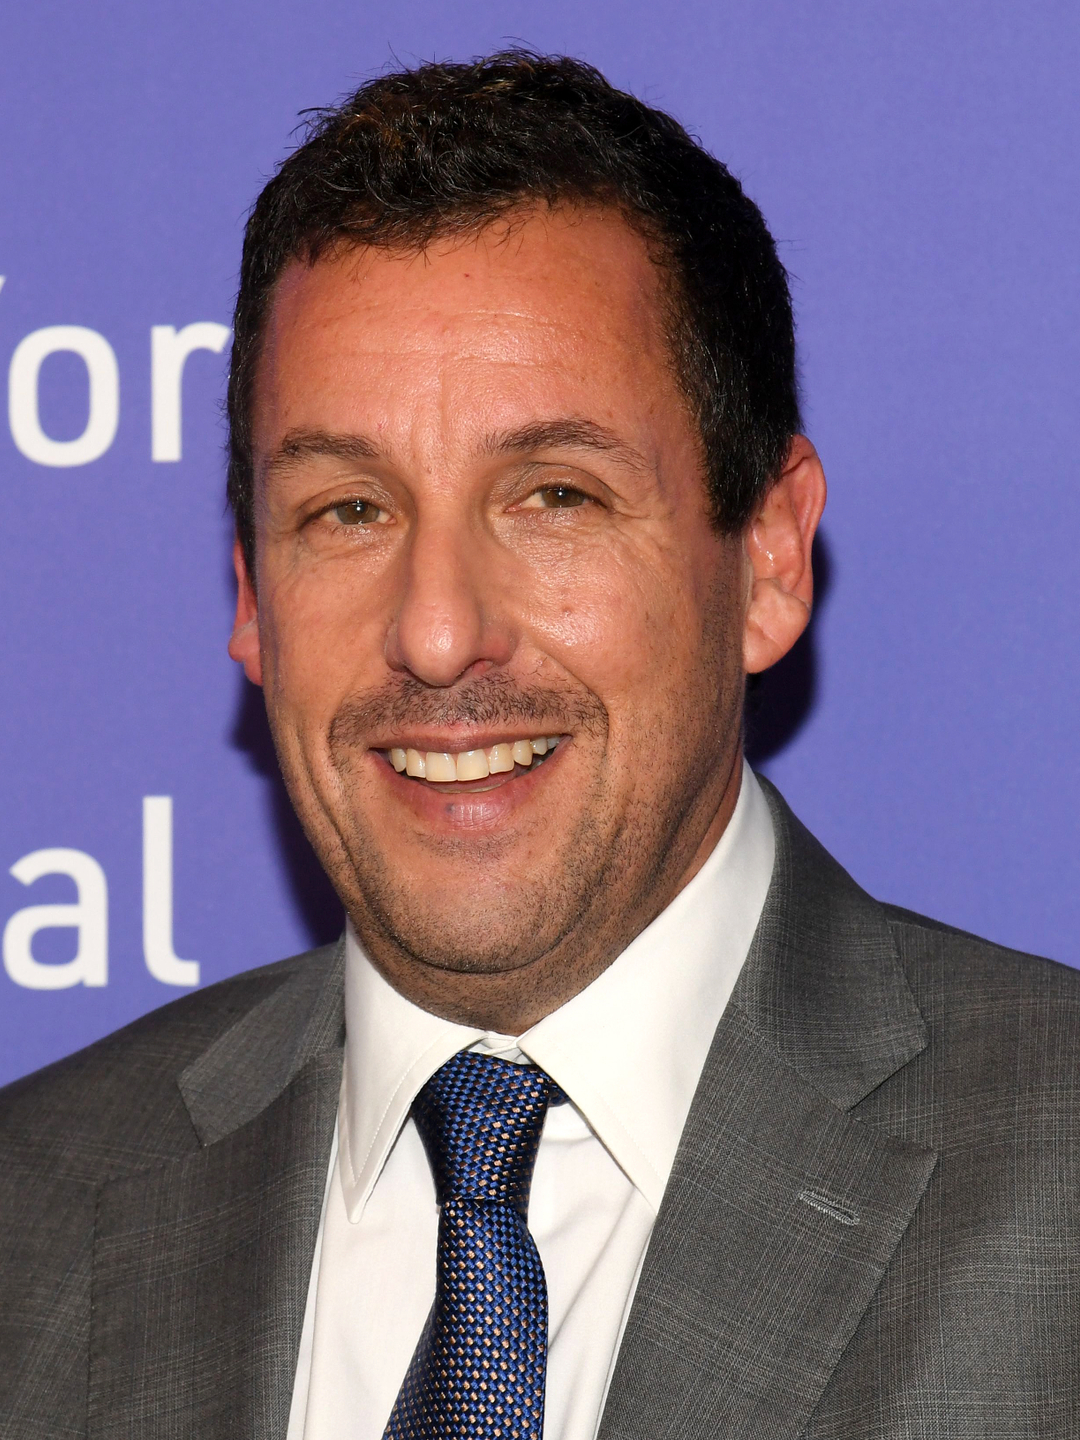 Adam Sandler how did he became famous